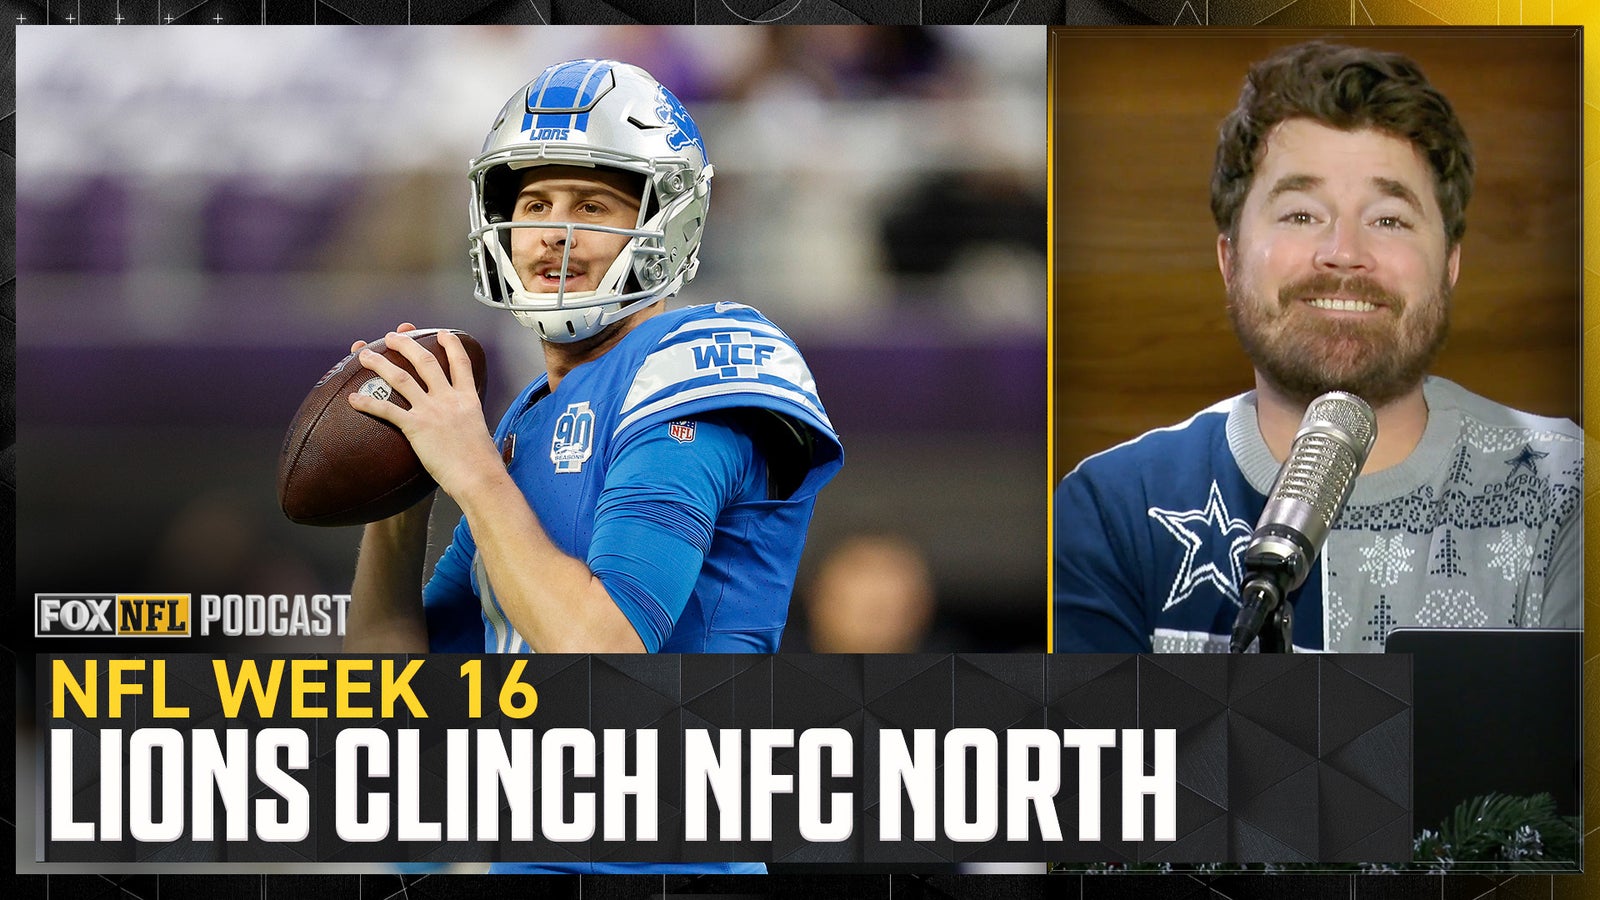 Jared Goff, Lions clinch NFC North – Dave Helman reacts